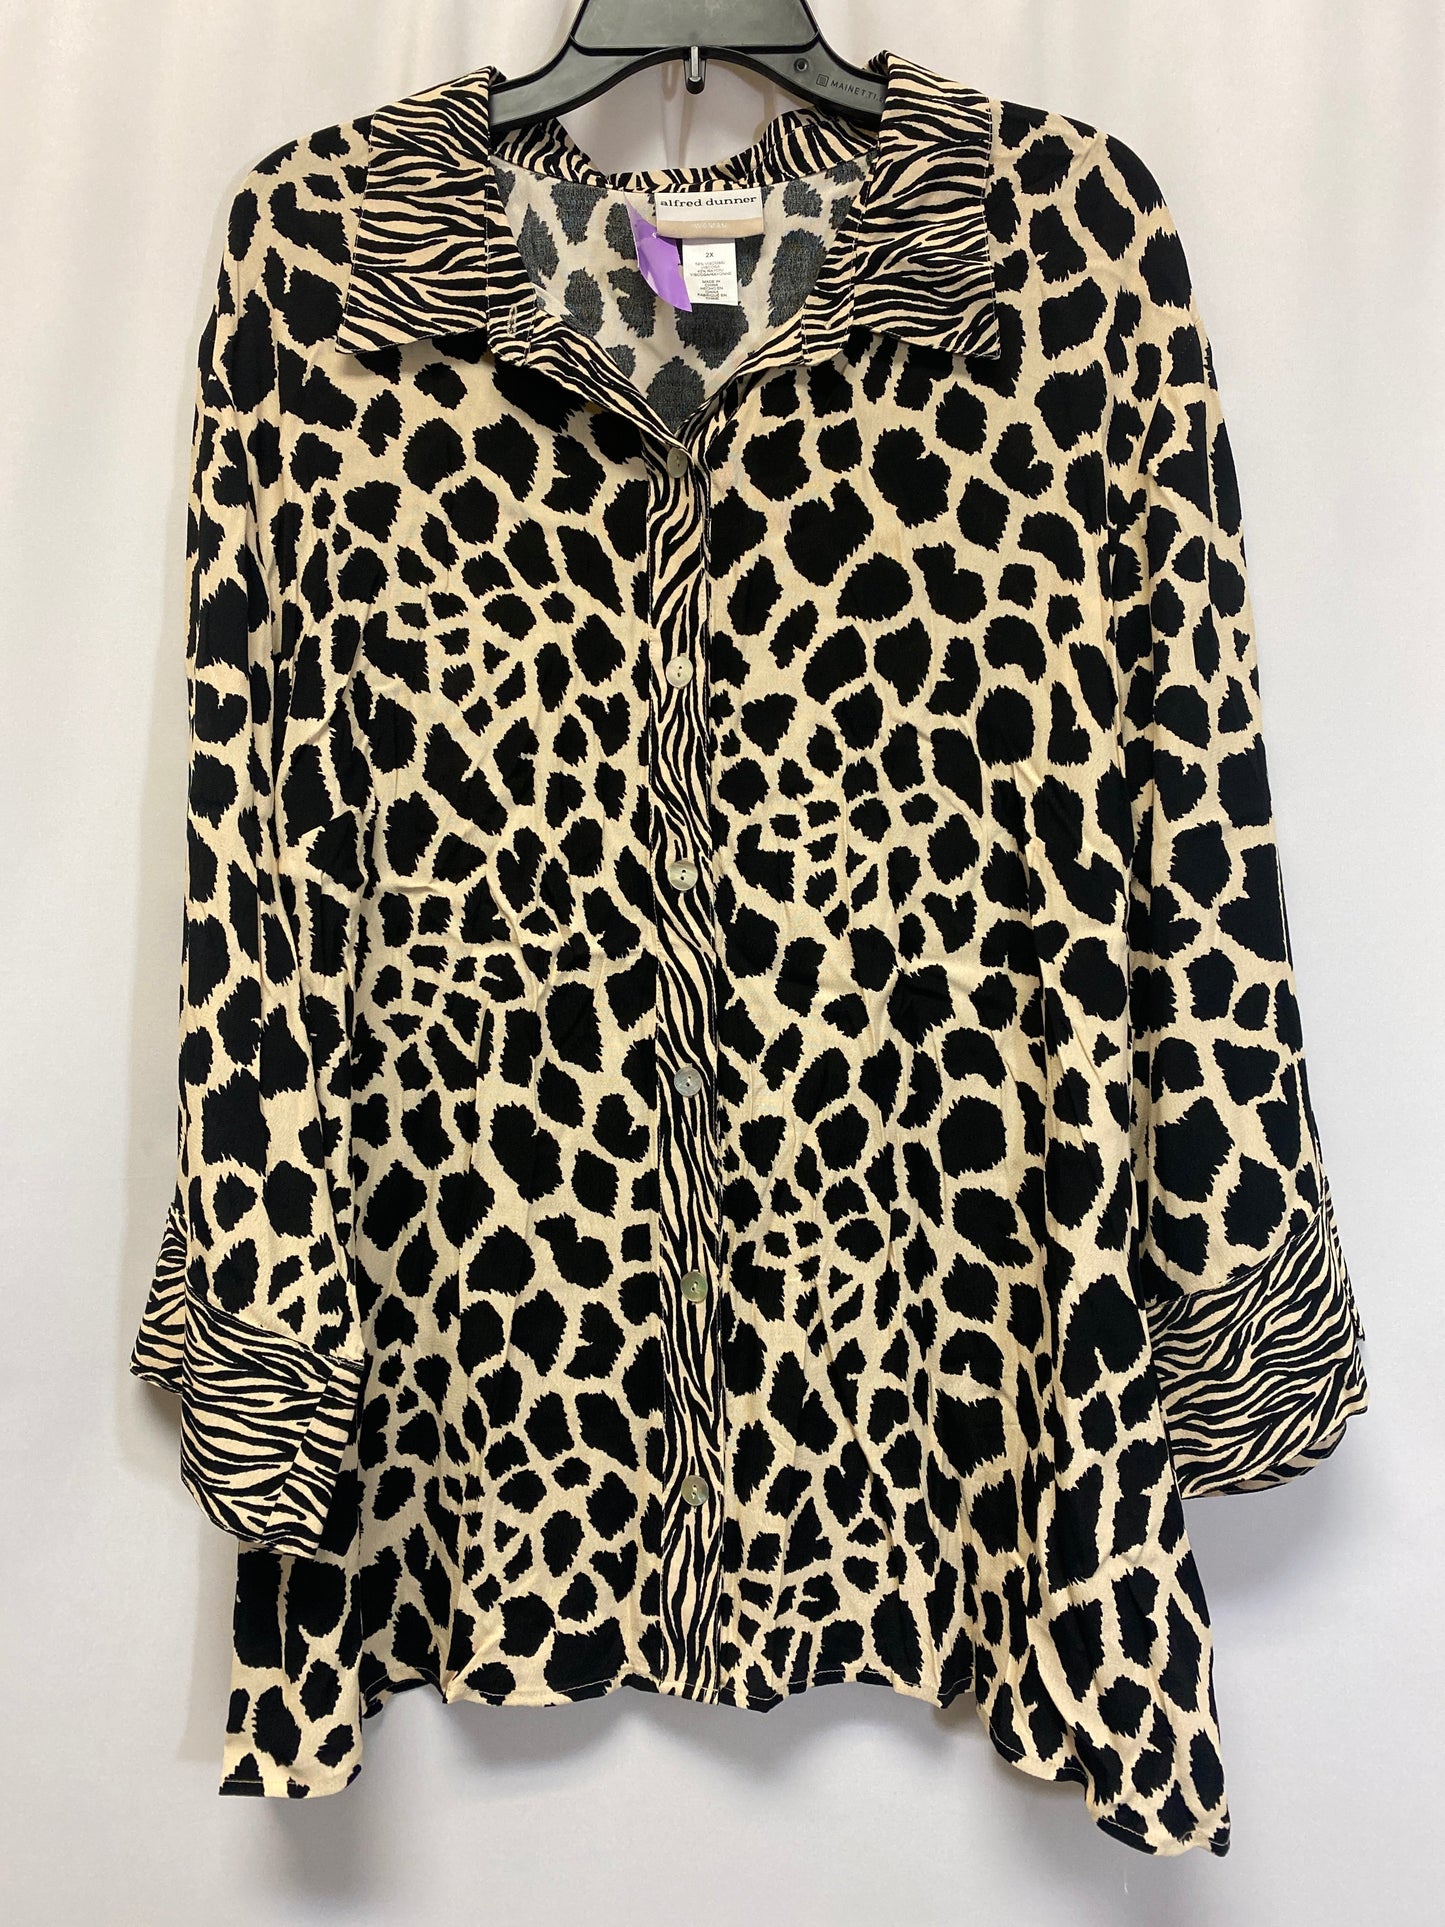 Animal Print Top Long Sleeve Alfred Dunner, Size 2x